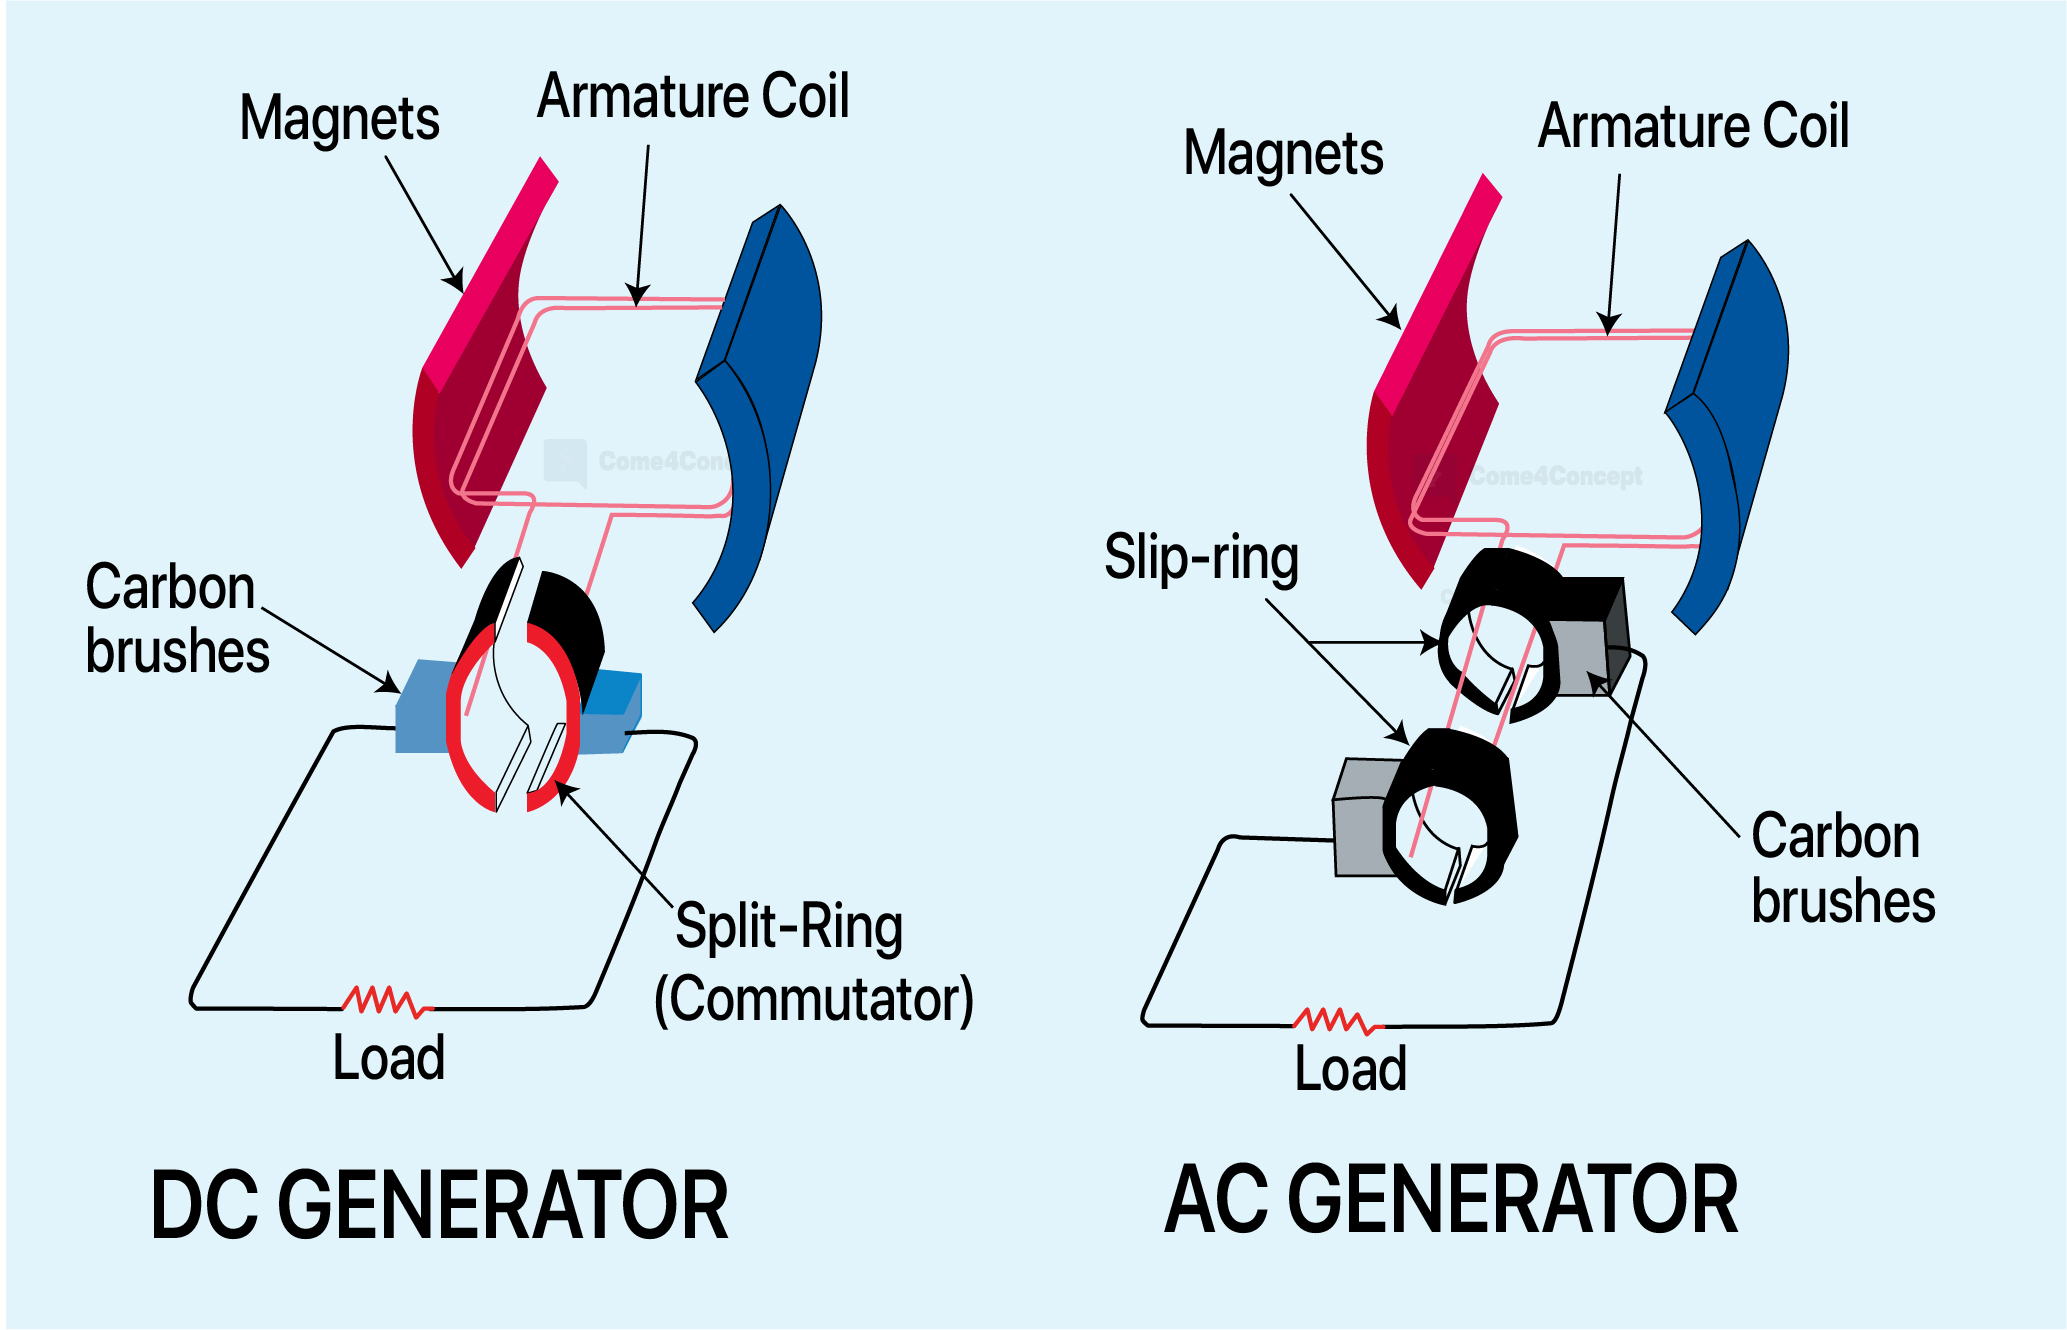 Working Principle Of Ac Generator A Clear Guide Linquip